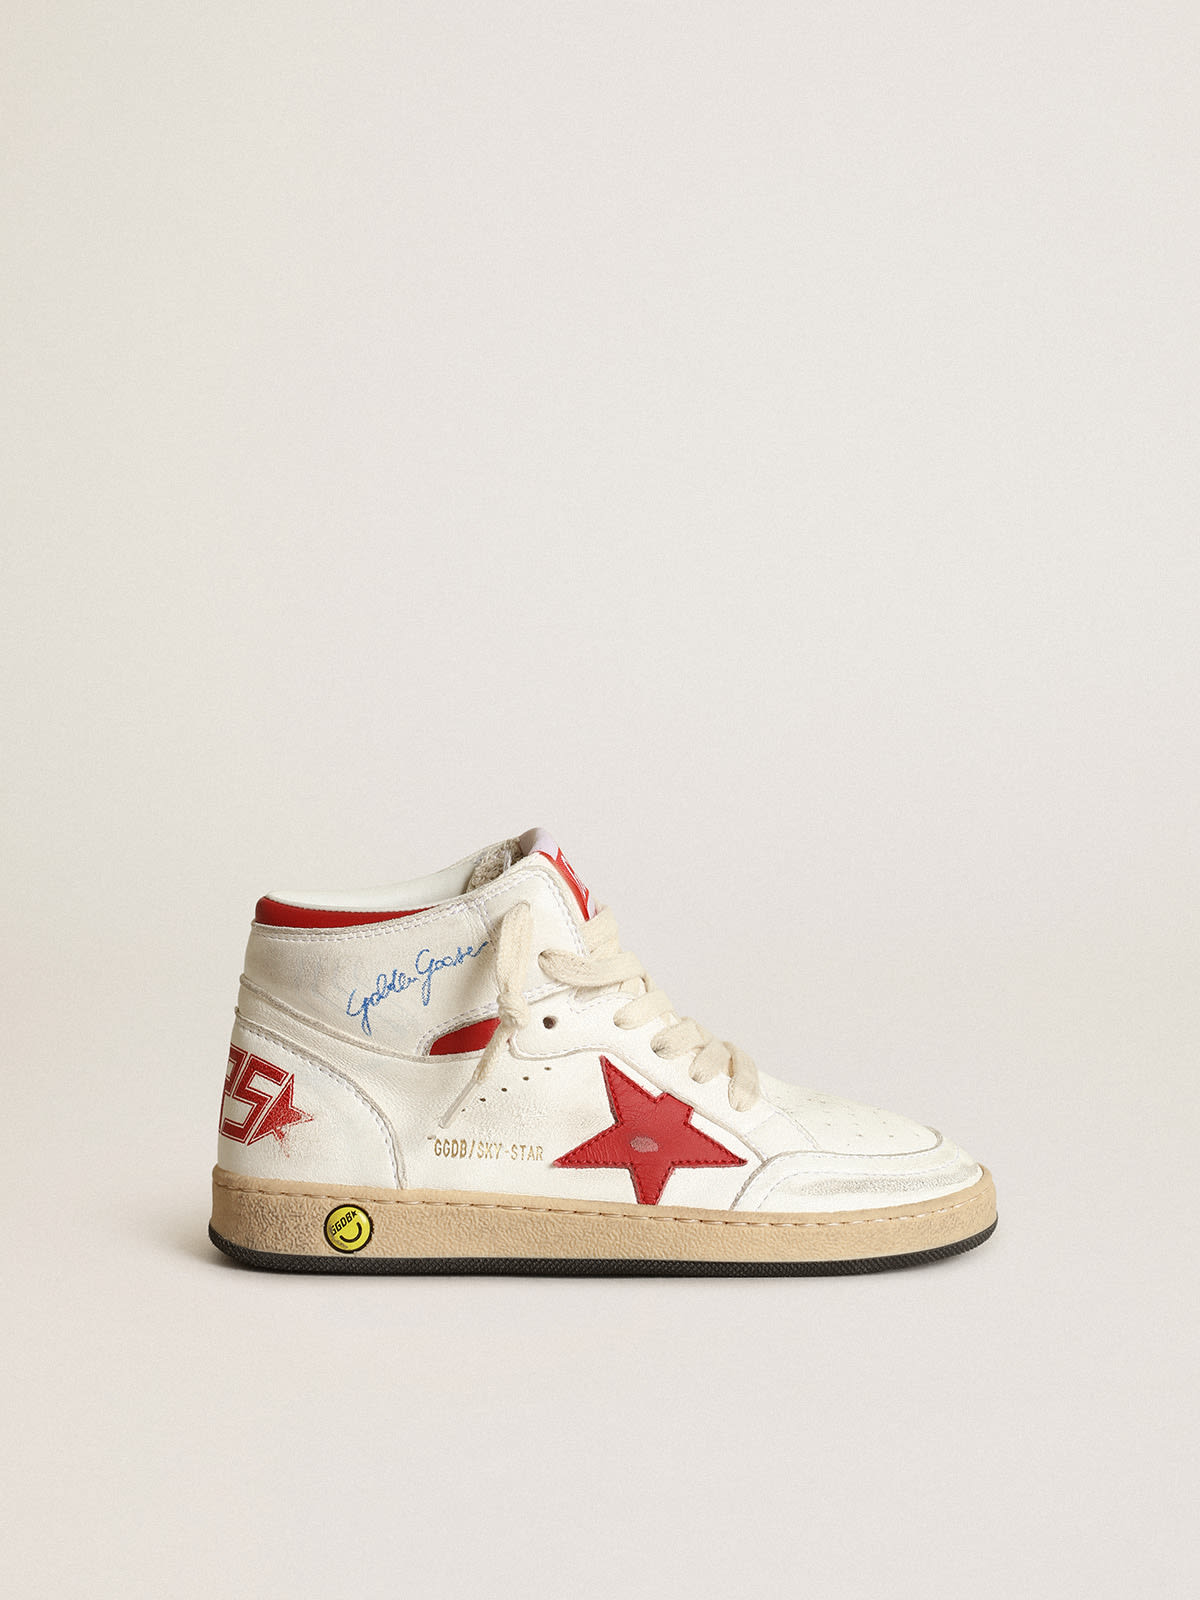 Young Sky-Star sneakers in white nappa leather with red leather 